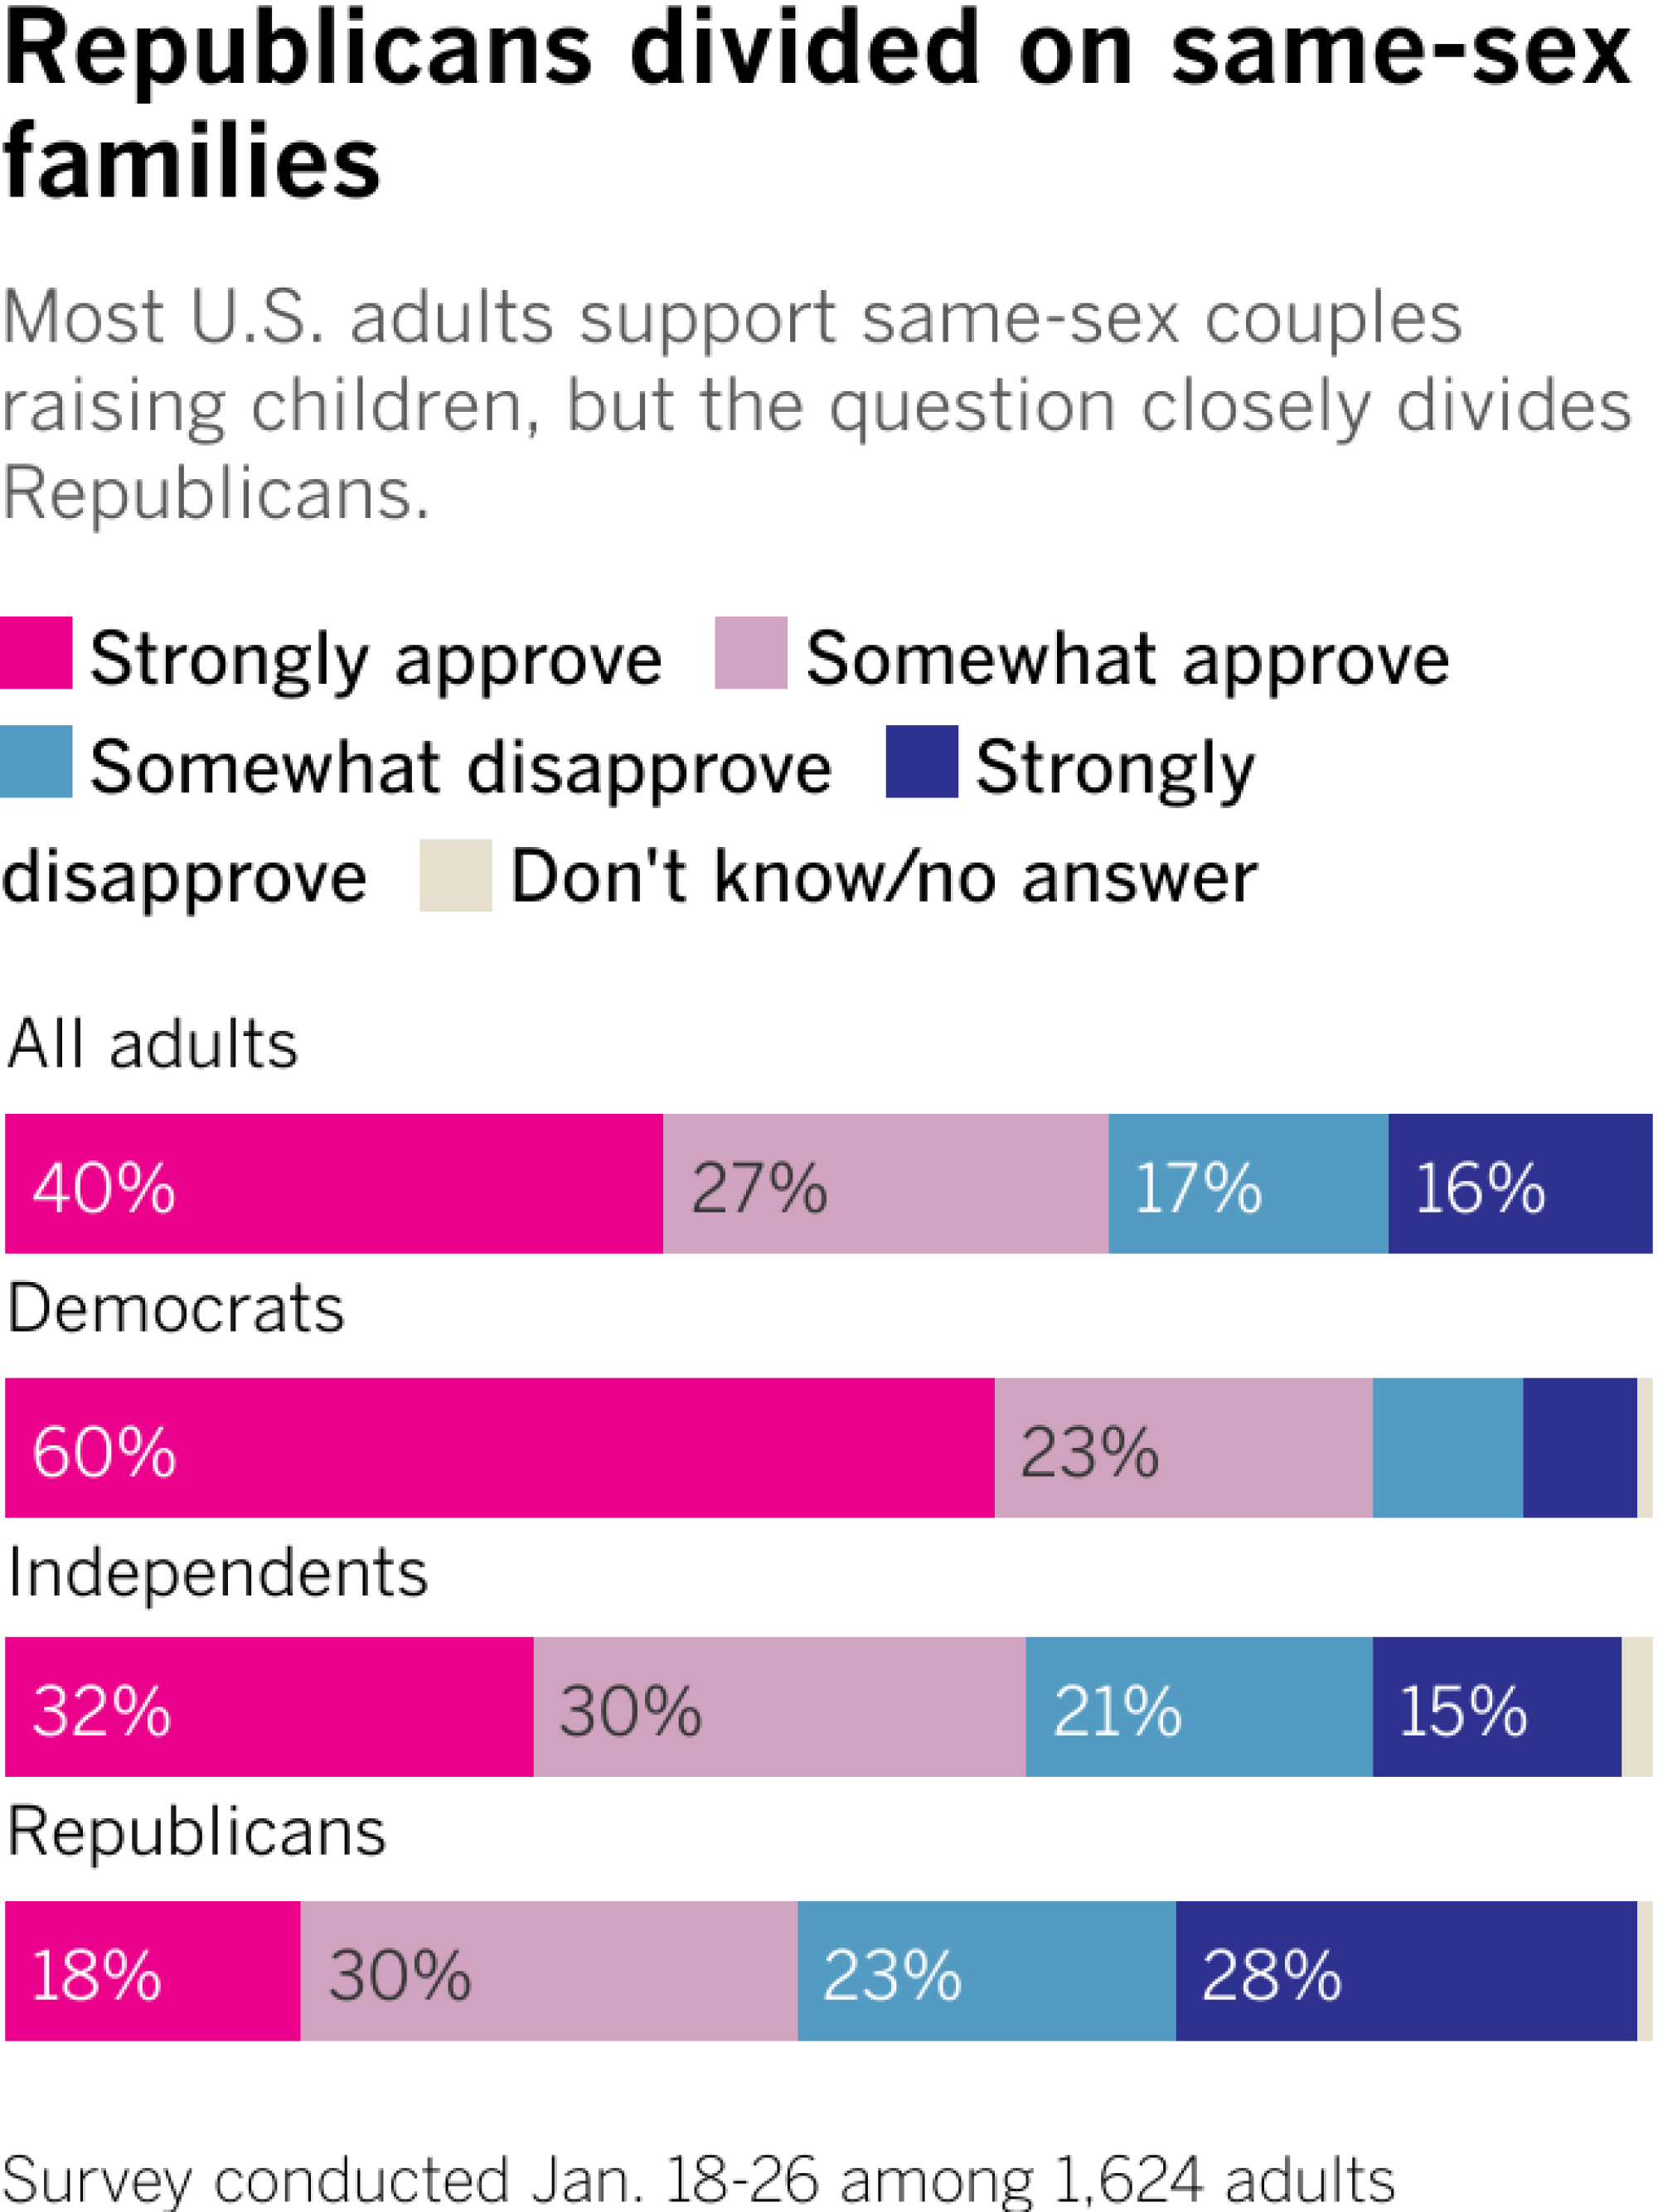 Bar chart shows the share of American adults, Democrats, independents and Republicans who approve or disapprove of same-sex couples raising children.